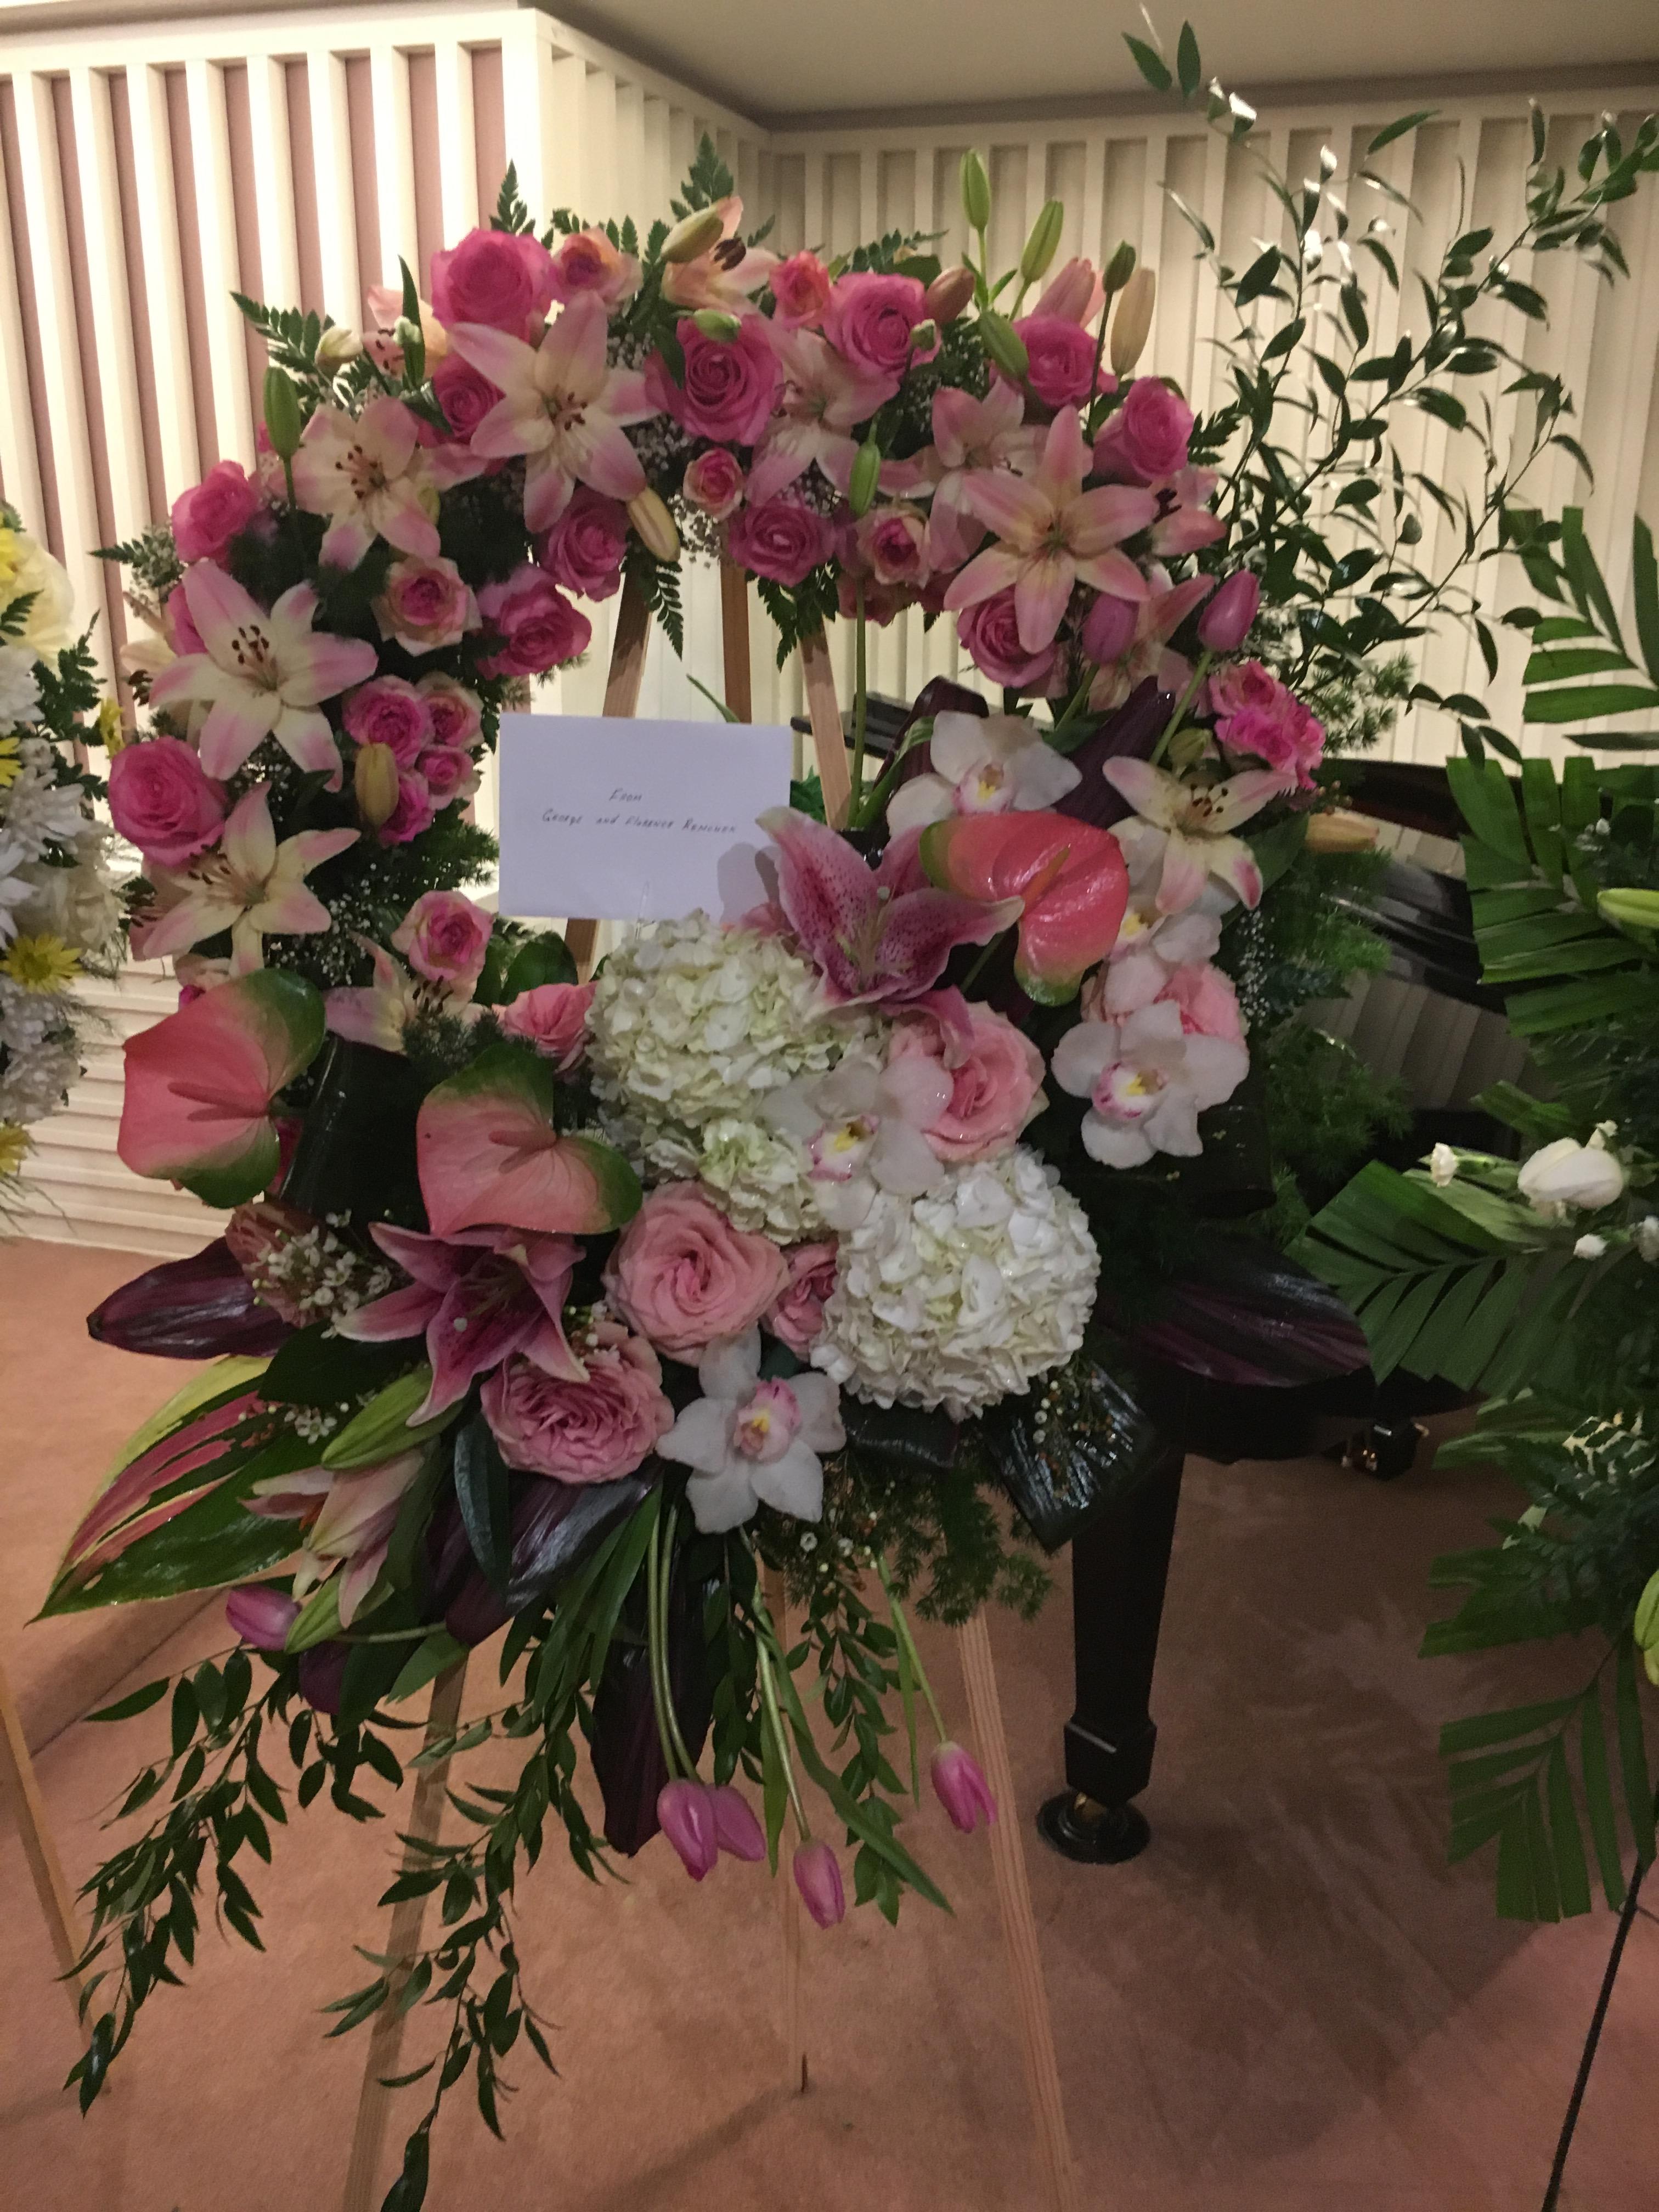 Beautiful Funeral Arrangement Pink flowers,Greens and others in